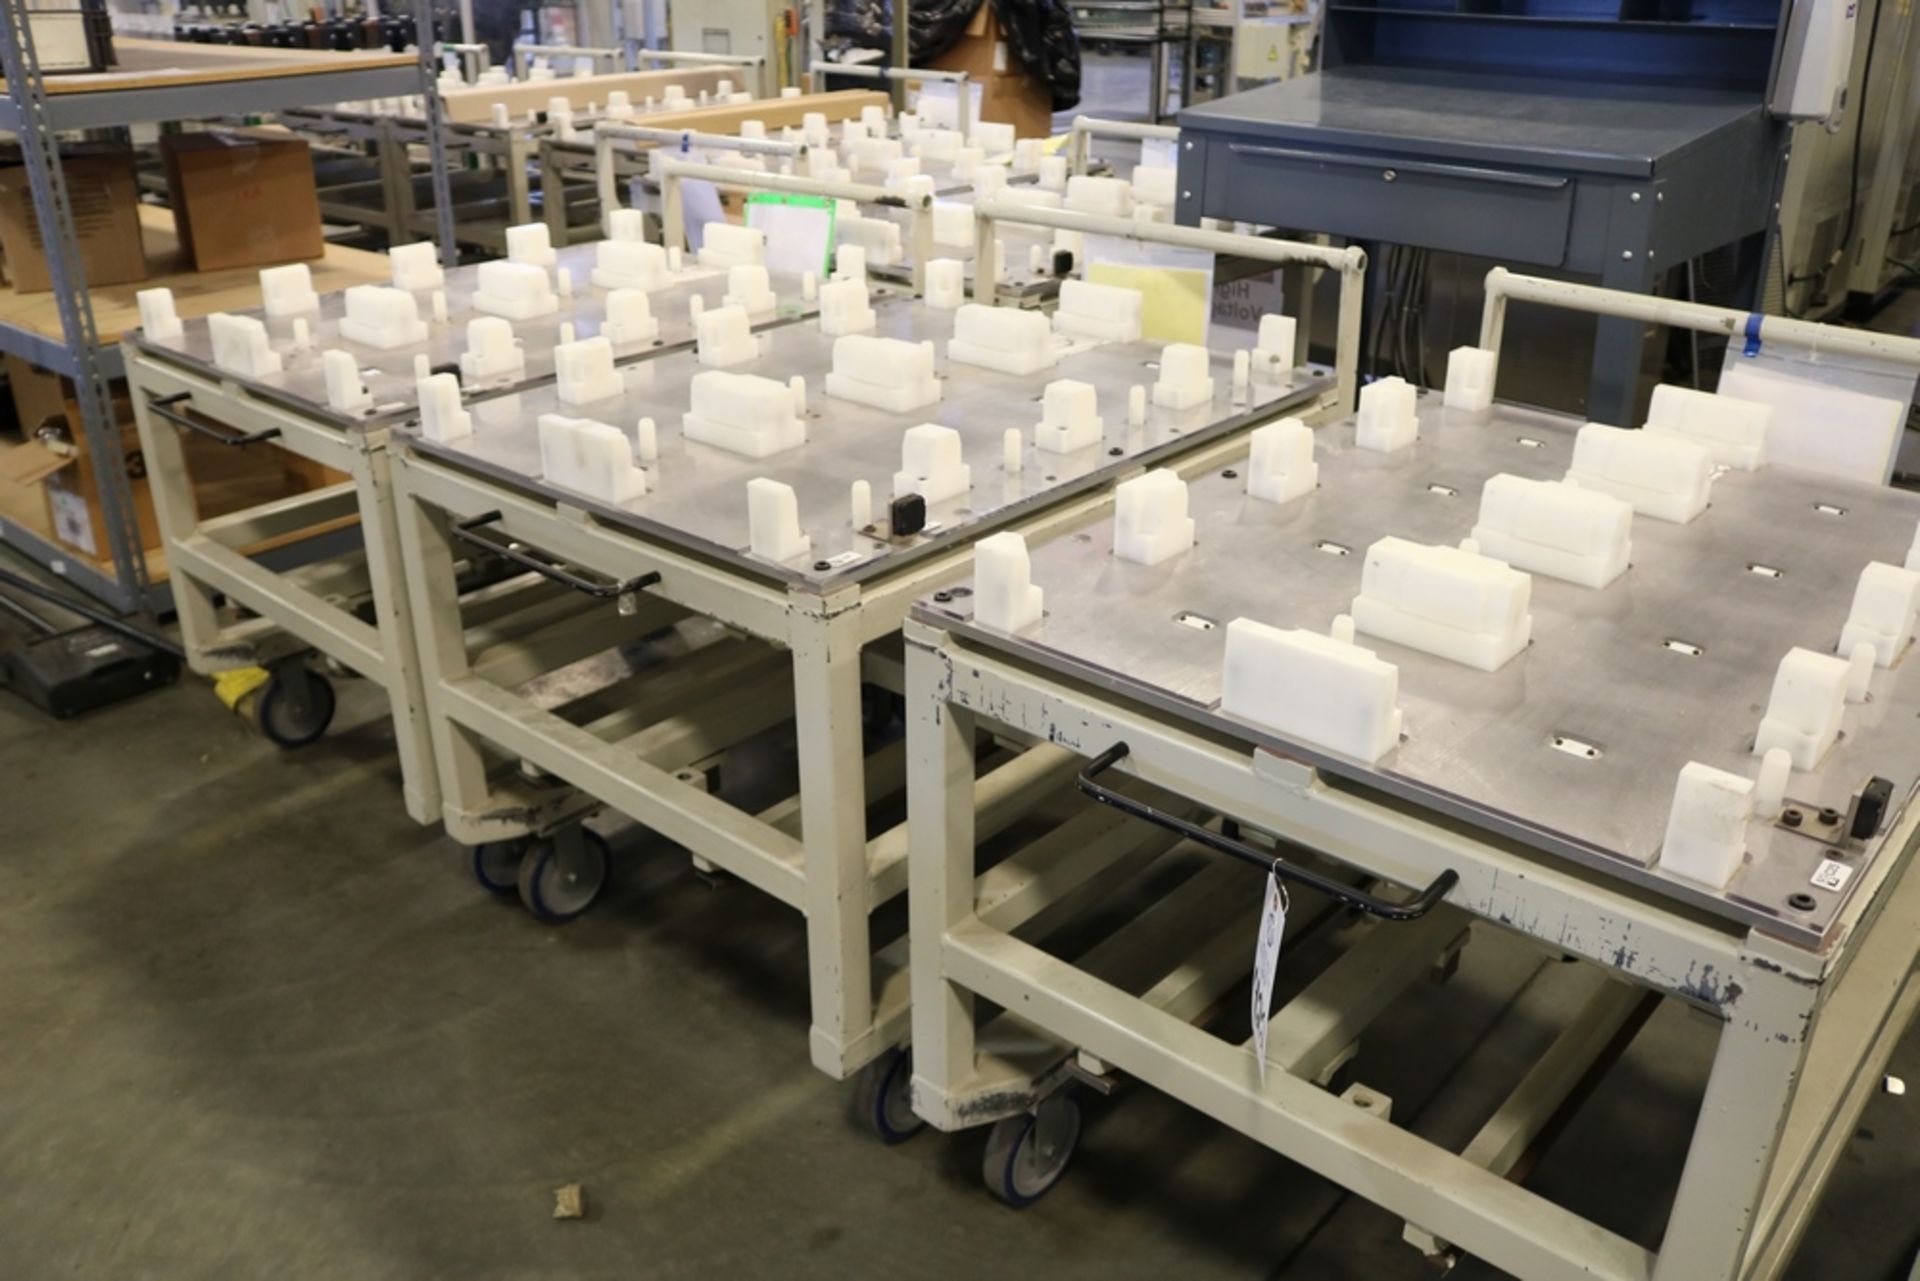 (3) Custom Made Die Carts For Module Final Assembly, Can Be Converted to Standard Die Carts